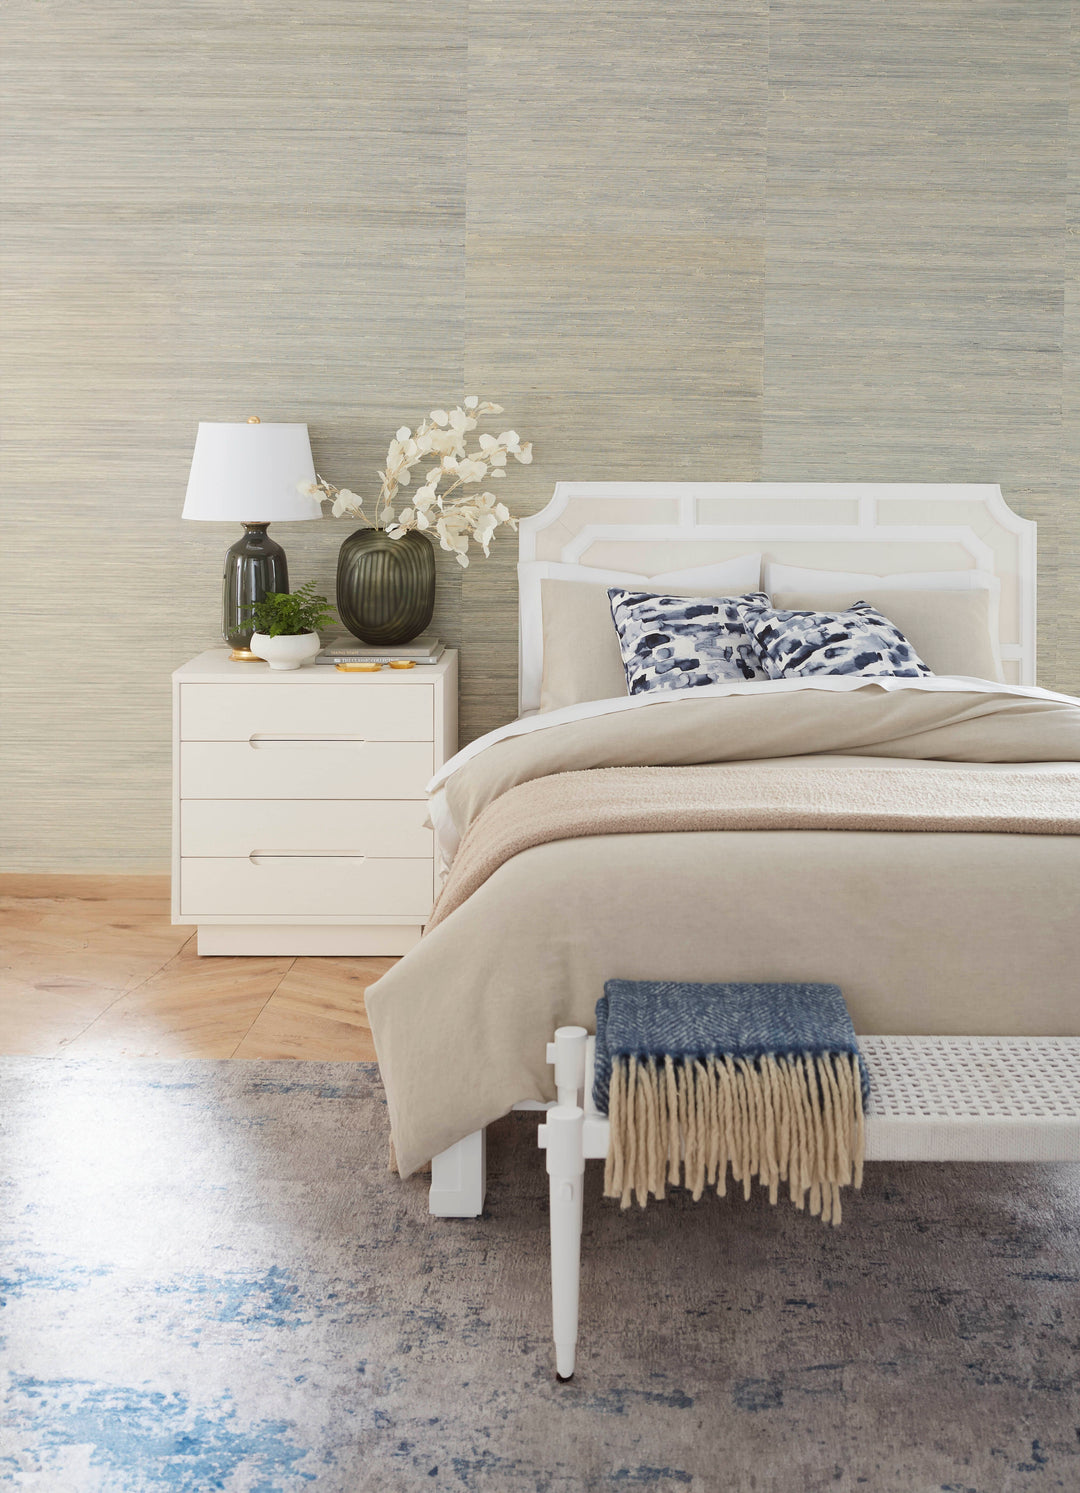 Olivia Bed with Headboard - Available in 2 Sizes